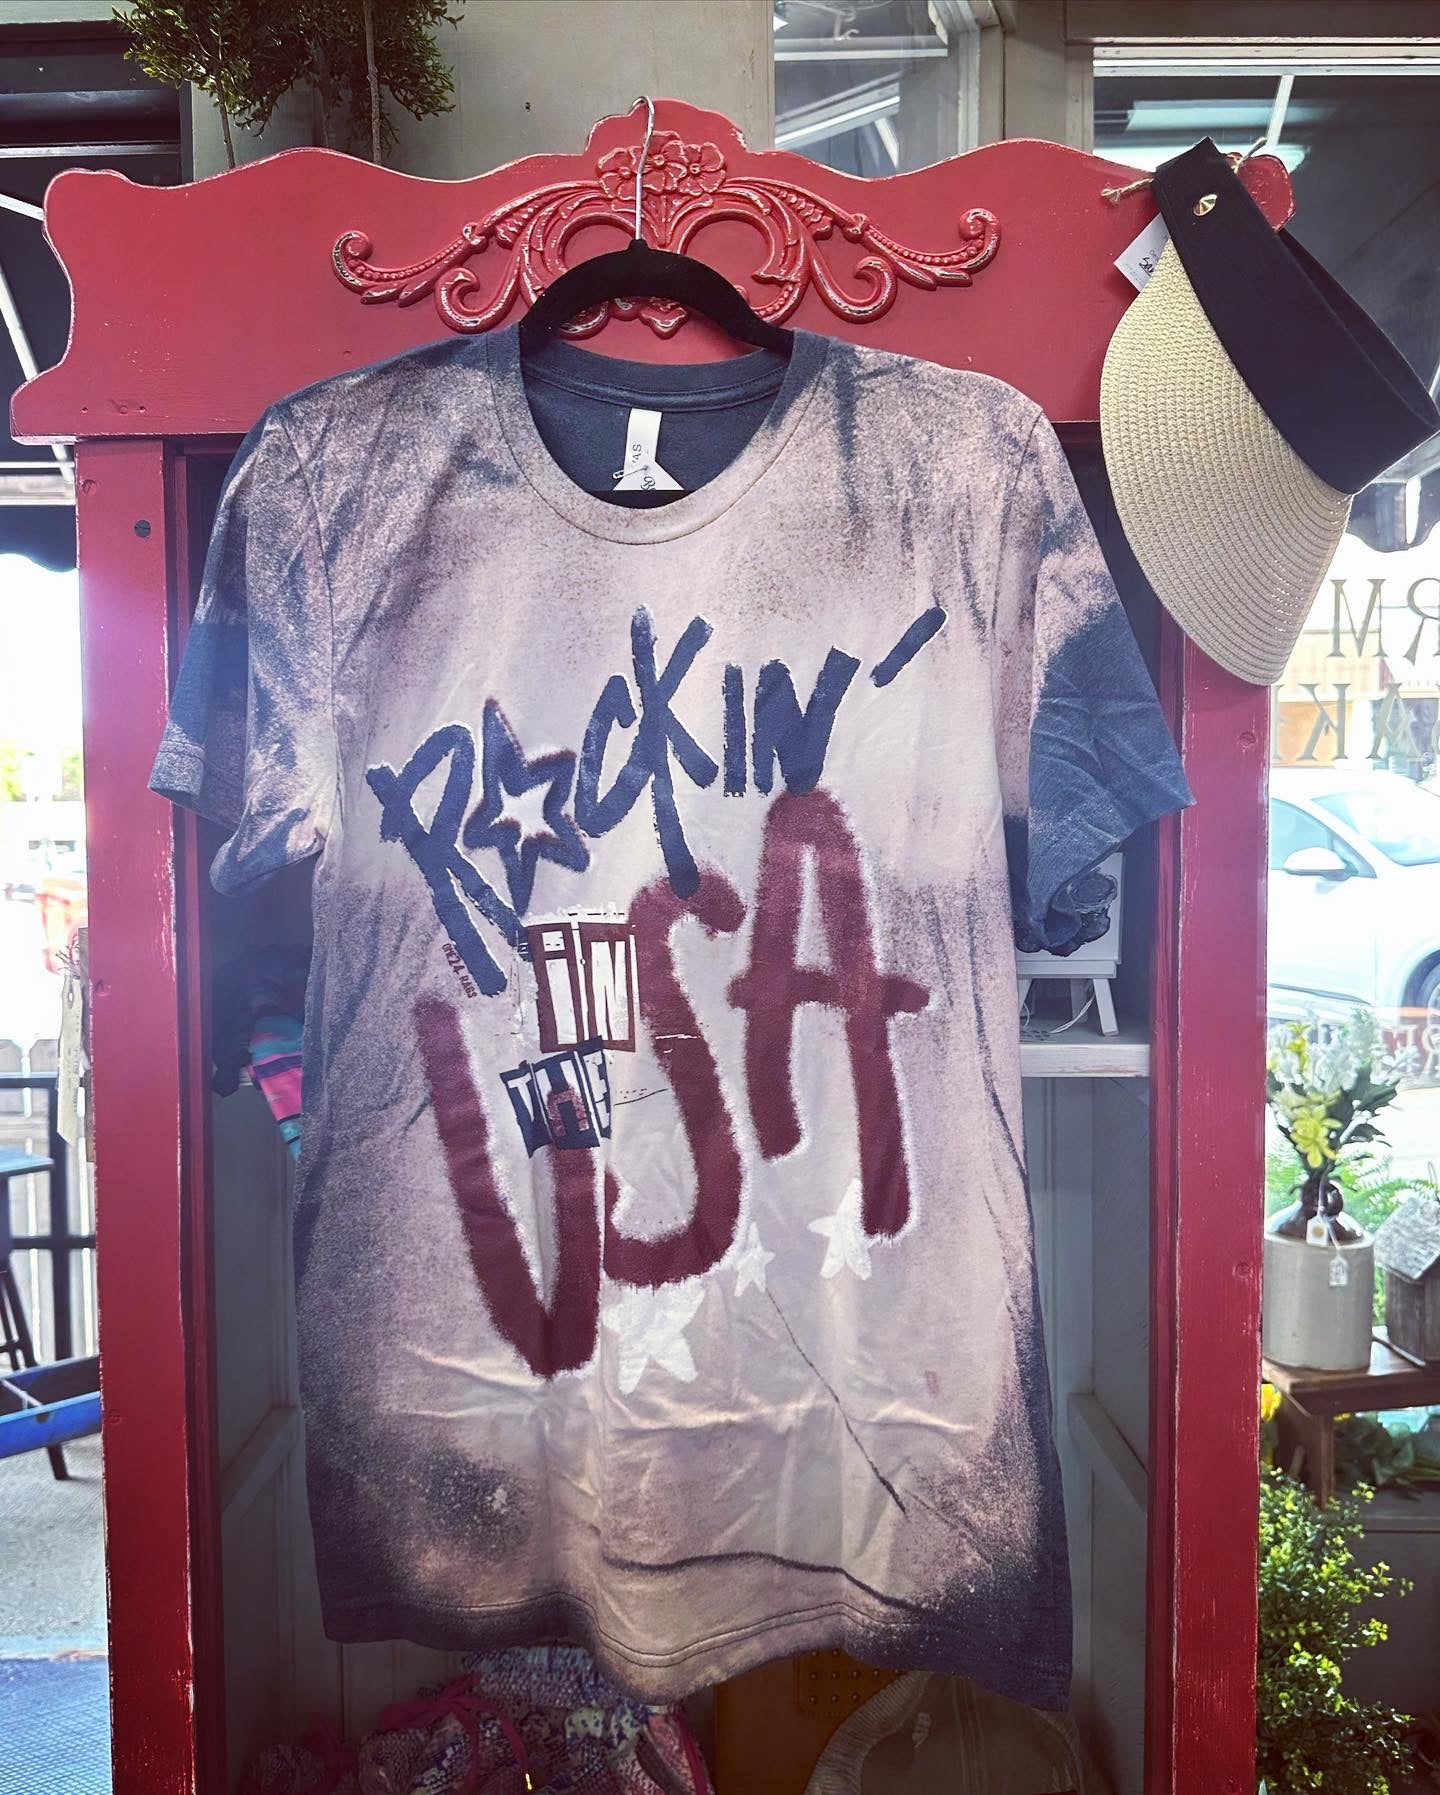 Rockin’ in the USA Unisex Tee-Hand Bleached